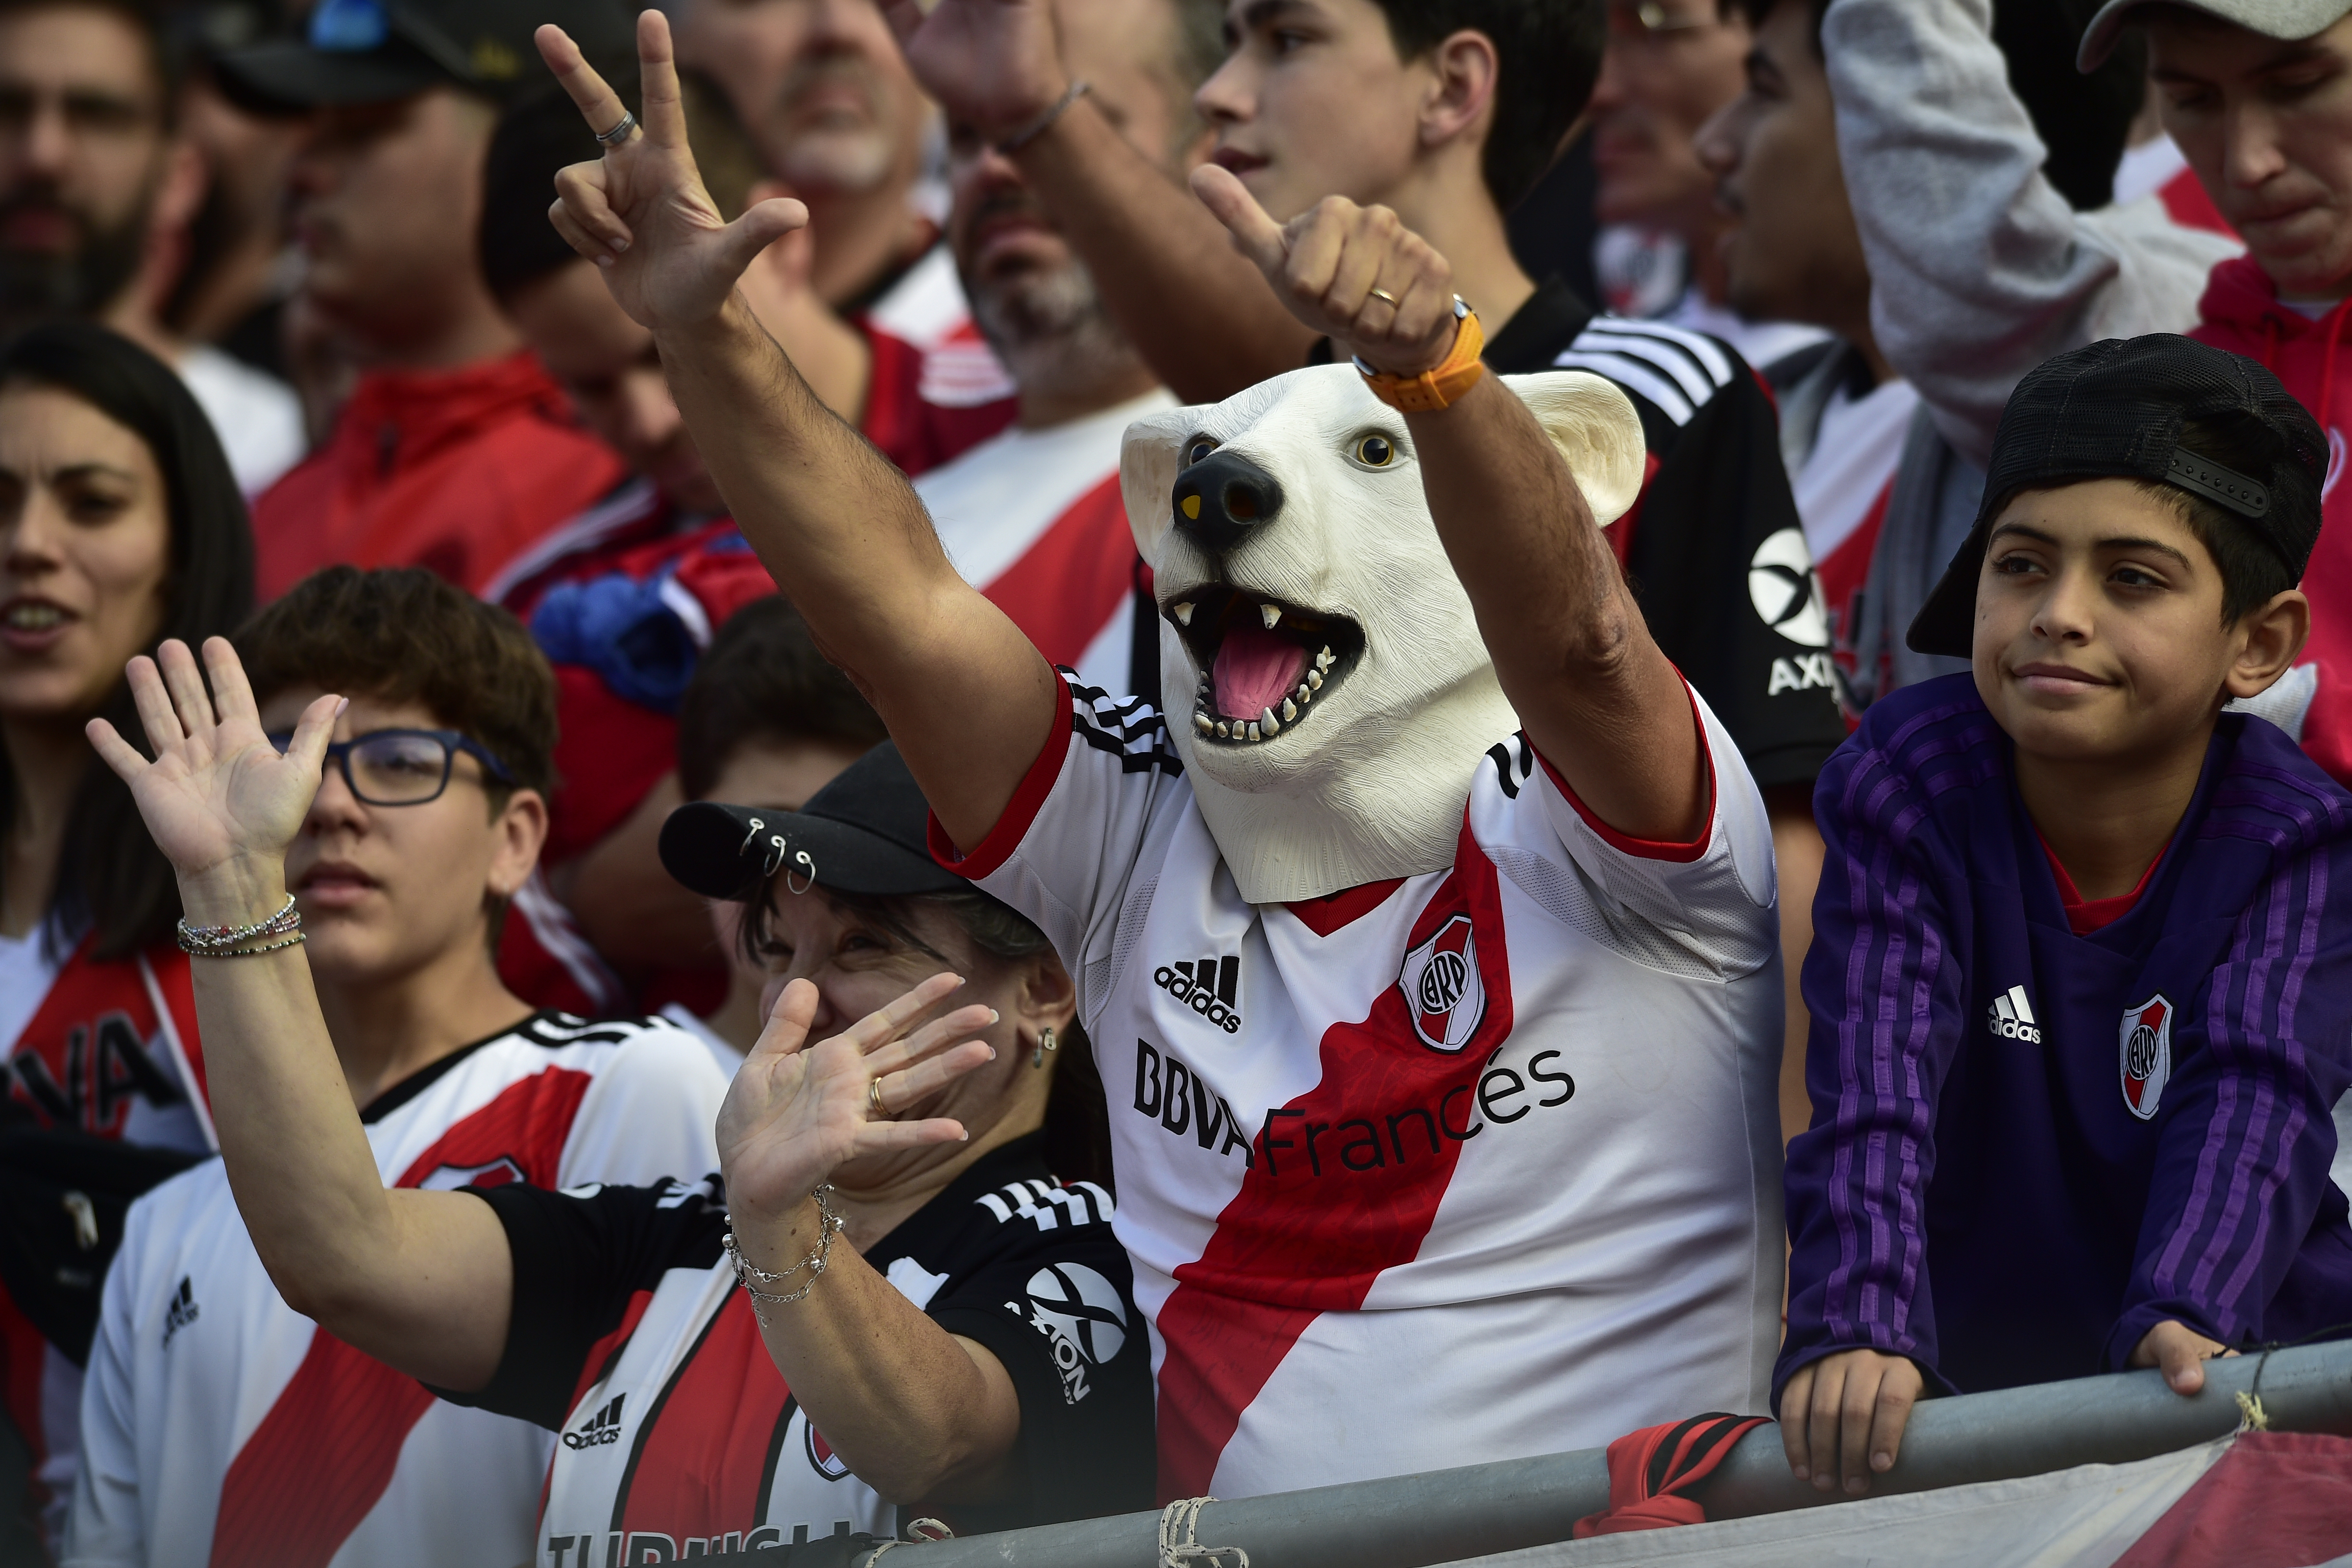 River Plate fans cheer before the start of a league match against Boca Juniors, at the Monumental stadium, in Buenos Aires, Argentina, on May 7, 2023. (AP Photo/Gustavo Garello)